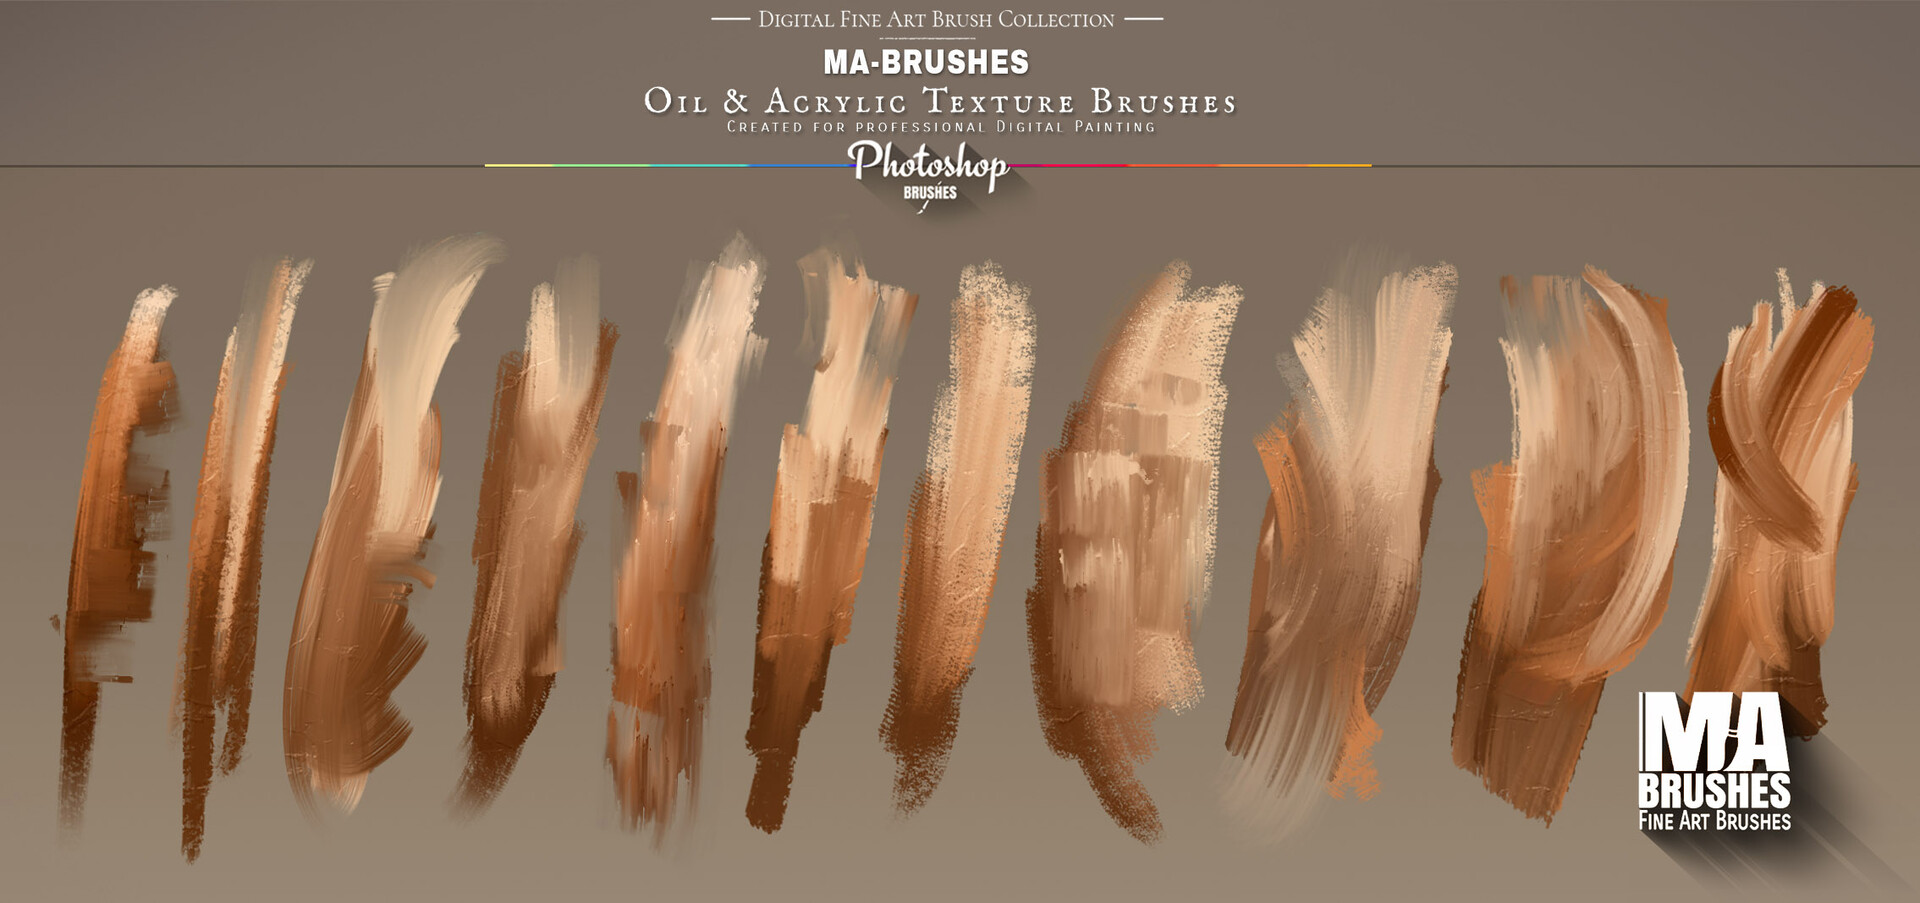 Concept Art and Photoshop Brushes - MA-BRUSHES - Most Realistic